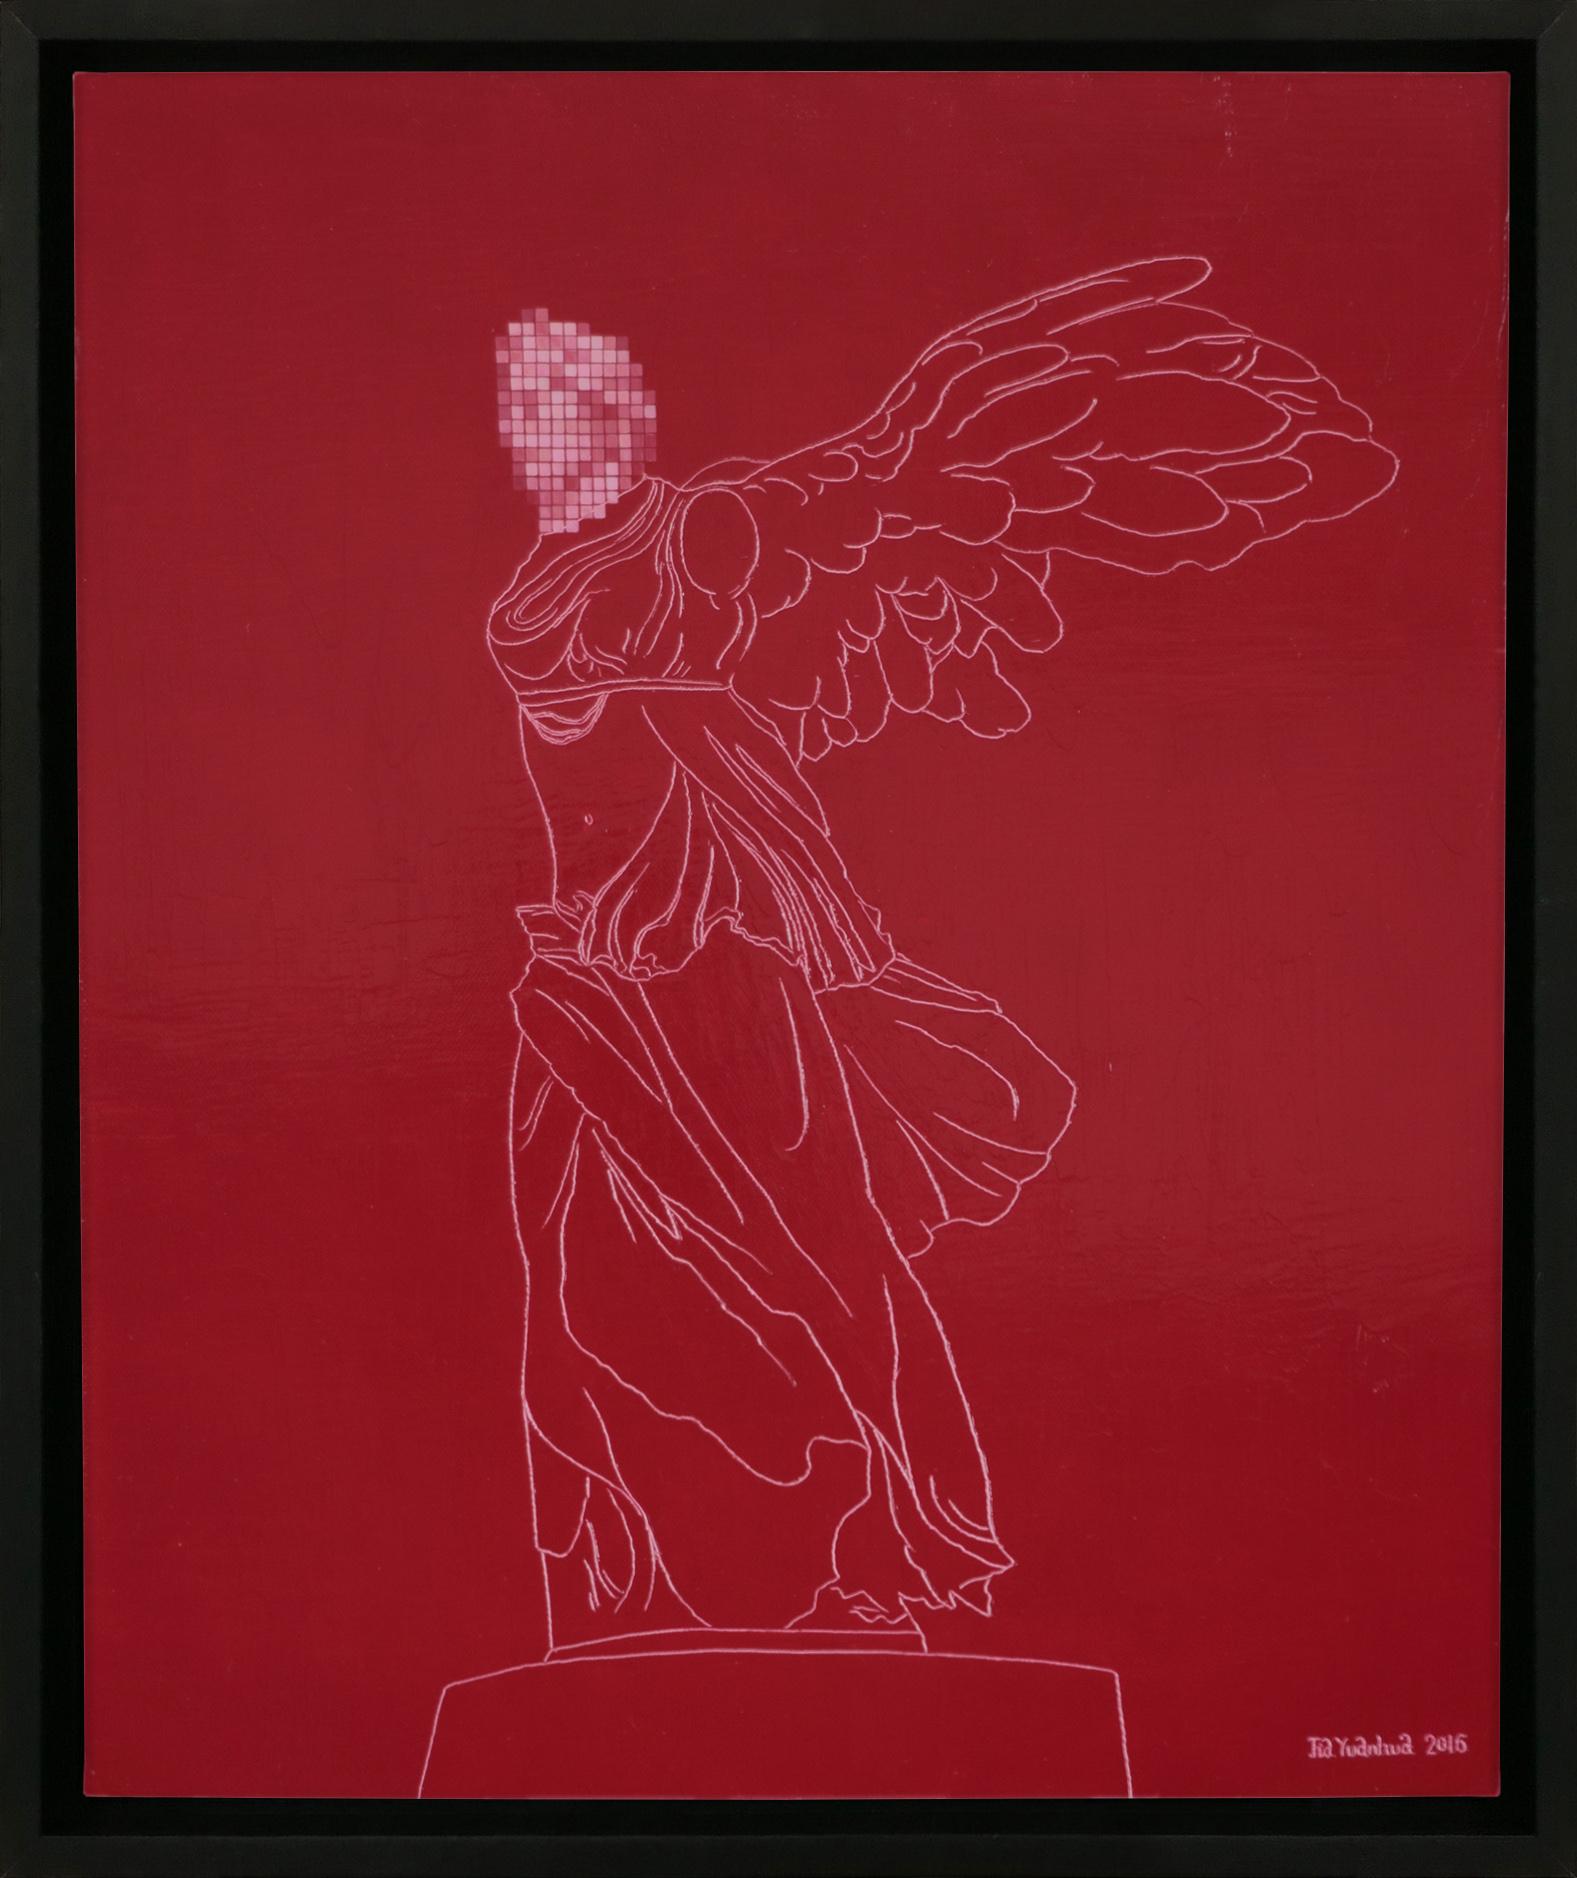 Artwork unframed 60 x 50 x 3 cm

What are people's criteria for judging beauty? A beautiful face? A different existence? A feeling of pleasure? Or just follow what others say and make yourself feel the same way? People say the Winged Victory is very